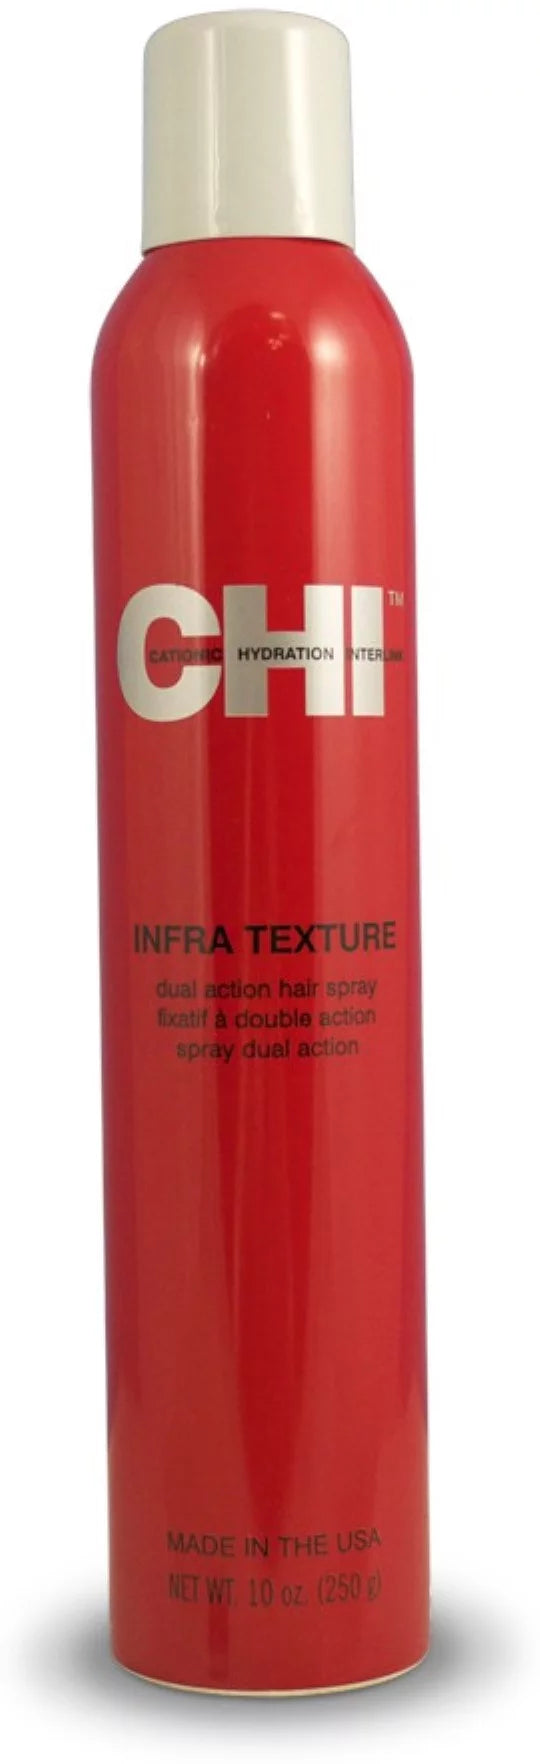 CHI Infra Texture Dual Action Hairspray 10 oz